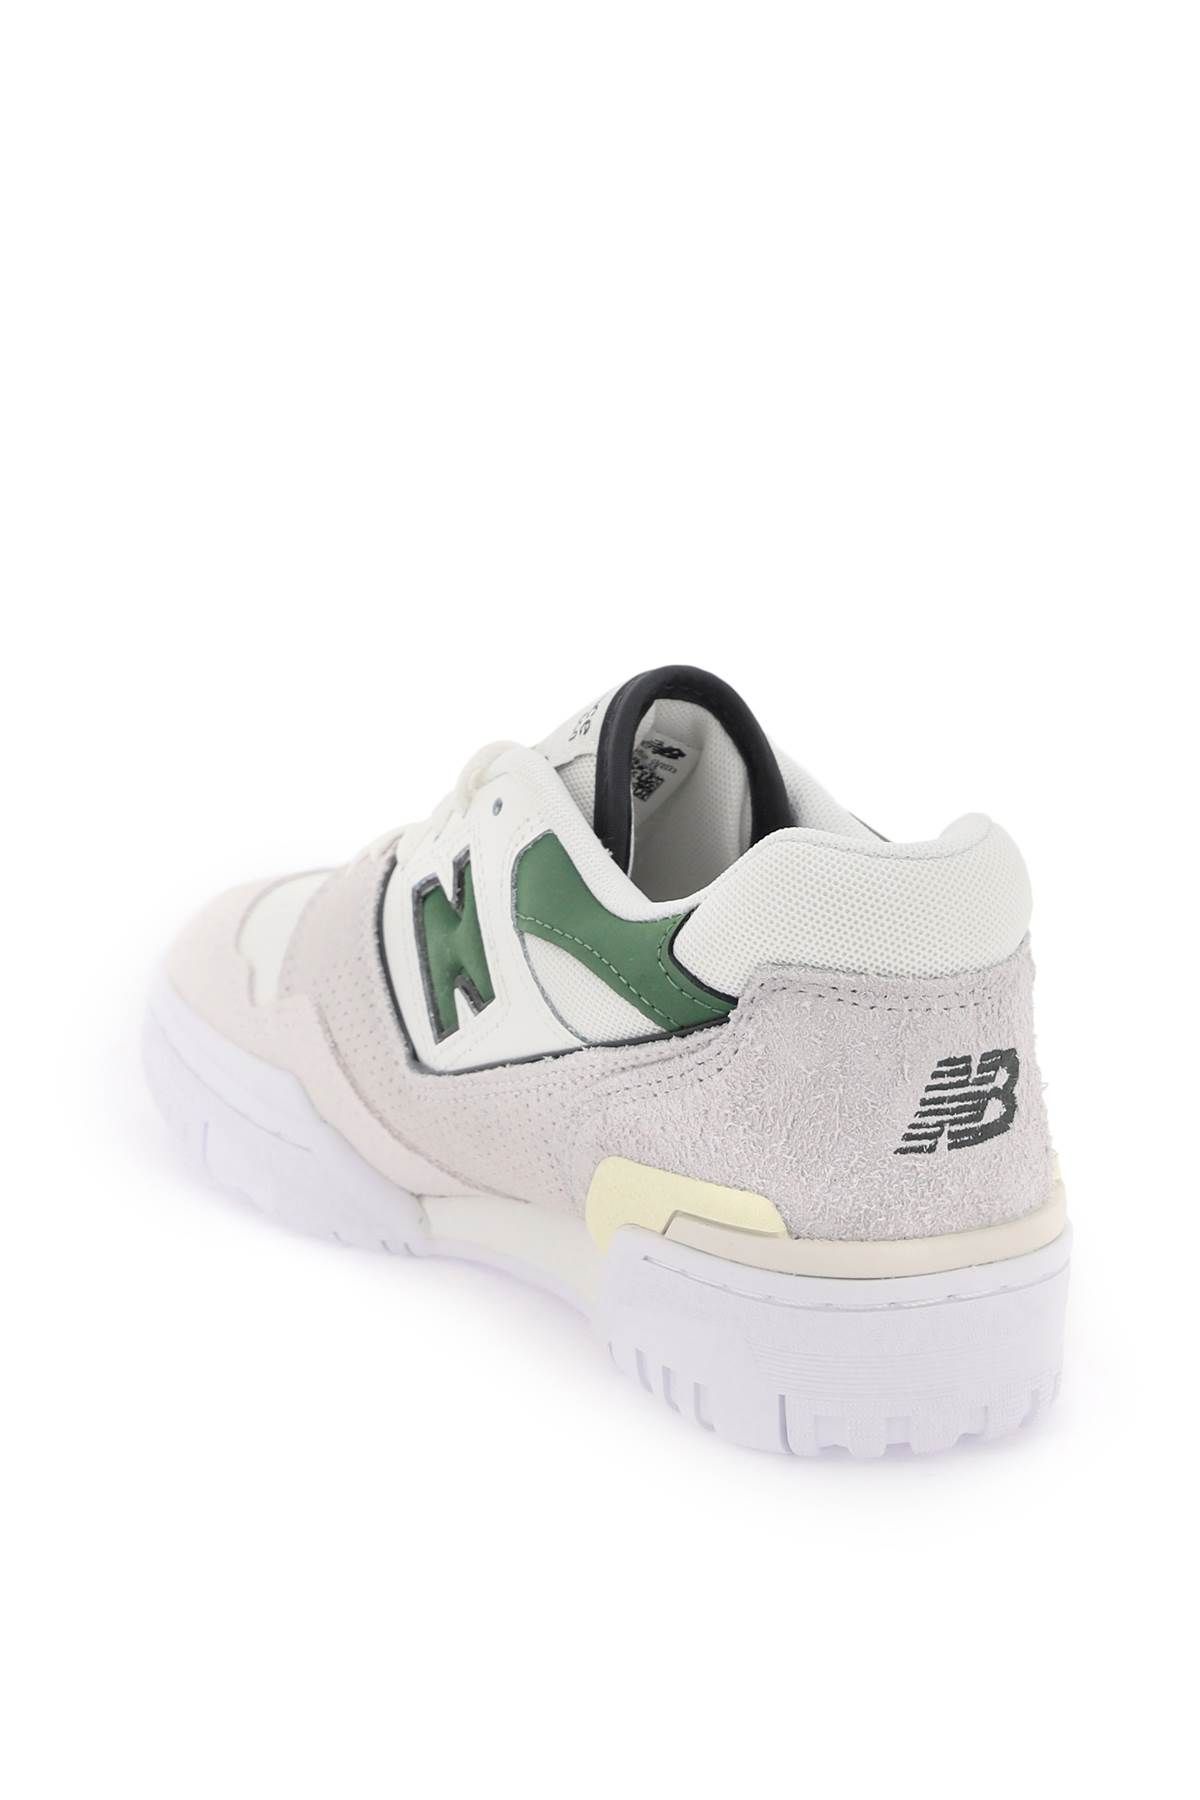 Shop New Balance 550 Sneakers In Beige,white,green